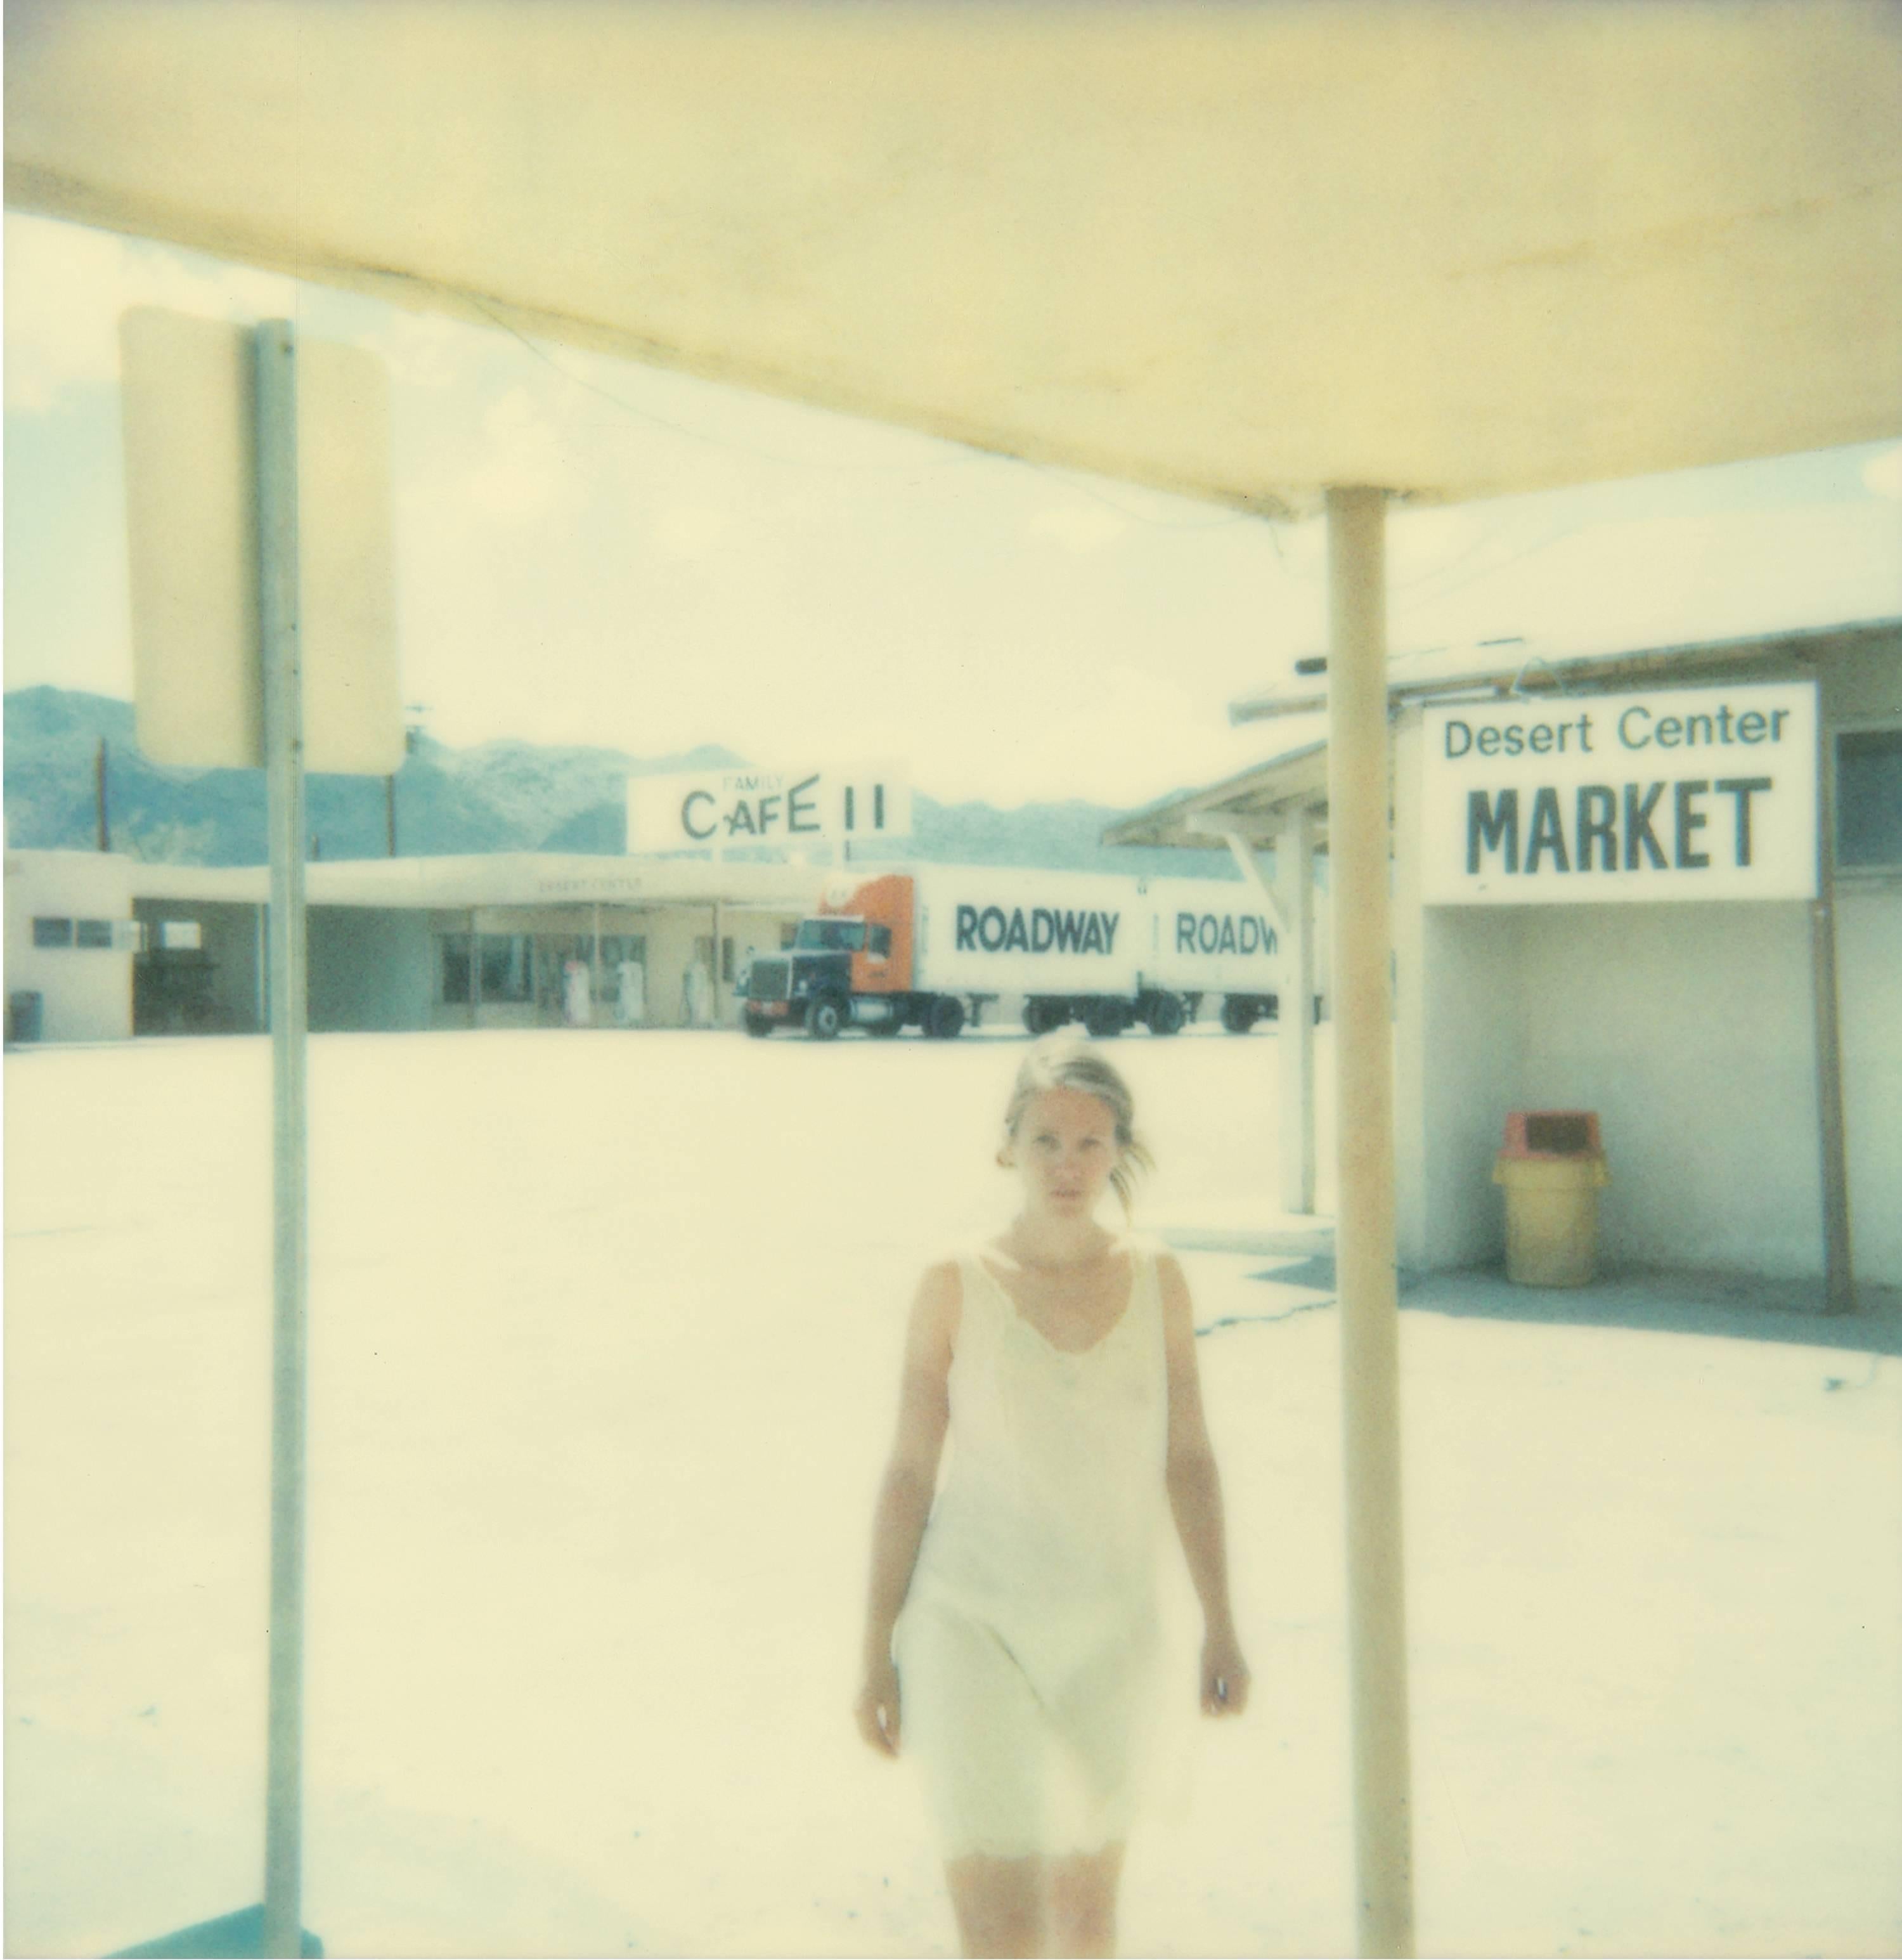 Gasstation (Stranger than Paradise), triptych - 2000

Edition of 30, 
3x38x36cm, 38x140cm installed. 
3 archival C-Prints, based on 3 Polaroids.
Signature label and Certificate. 
Artist Inventory No. 304.
Not mounted.

Exhibition History:
2002